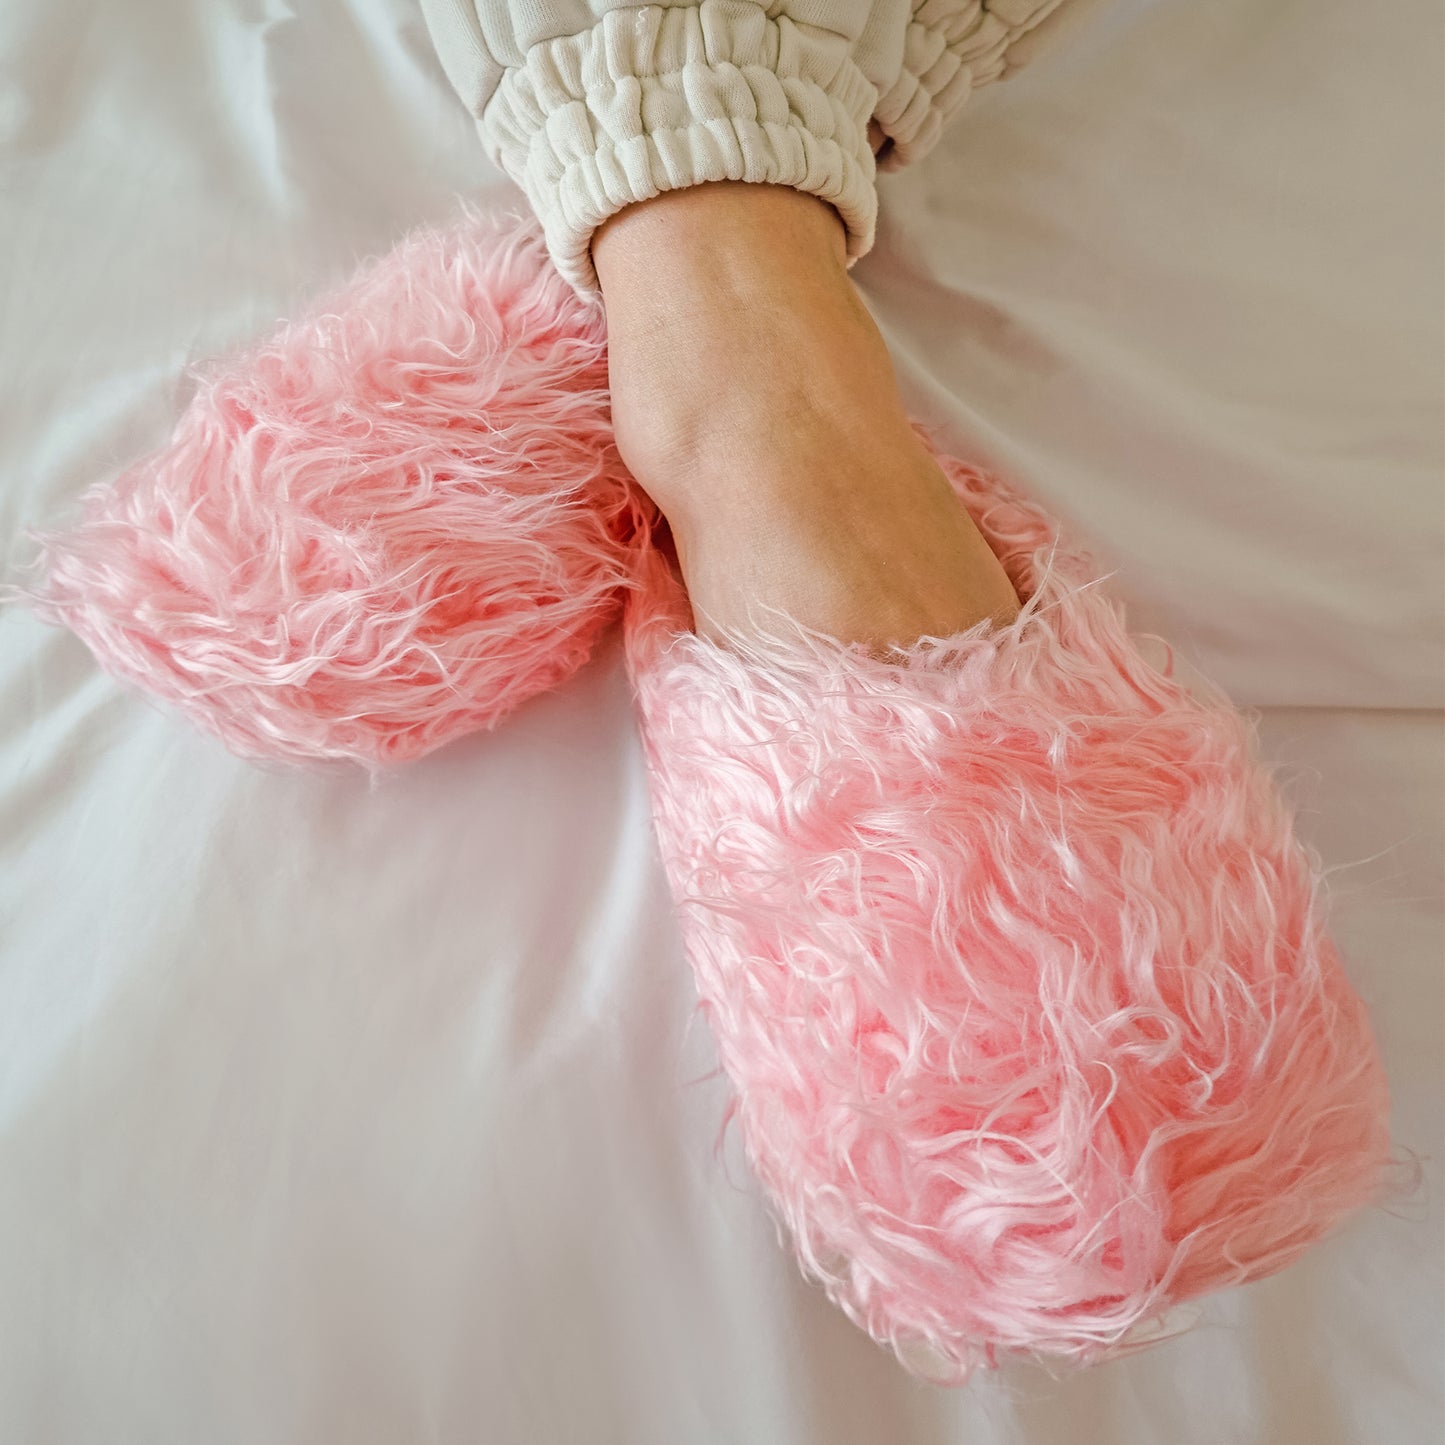 Boo Fuzzy Slippers